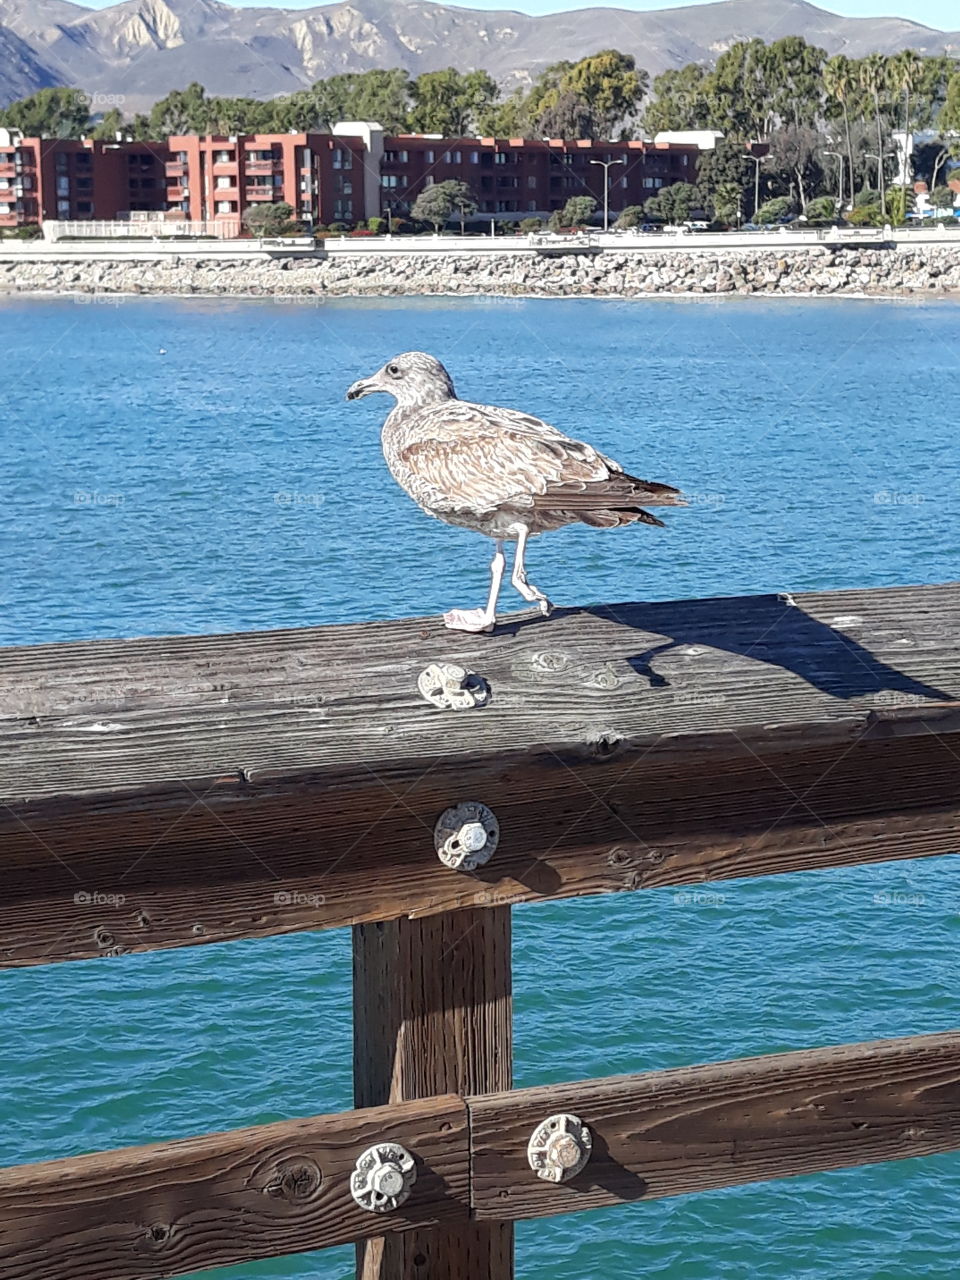 Captured at a good time, this bird is just living life to his fullest. Showing off the background gives you an idea of where he is, and where he has been. Also, beach pictures are always a must